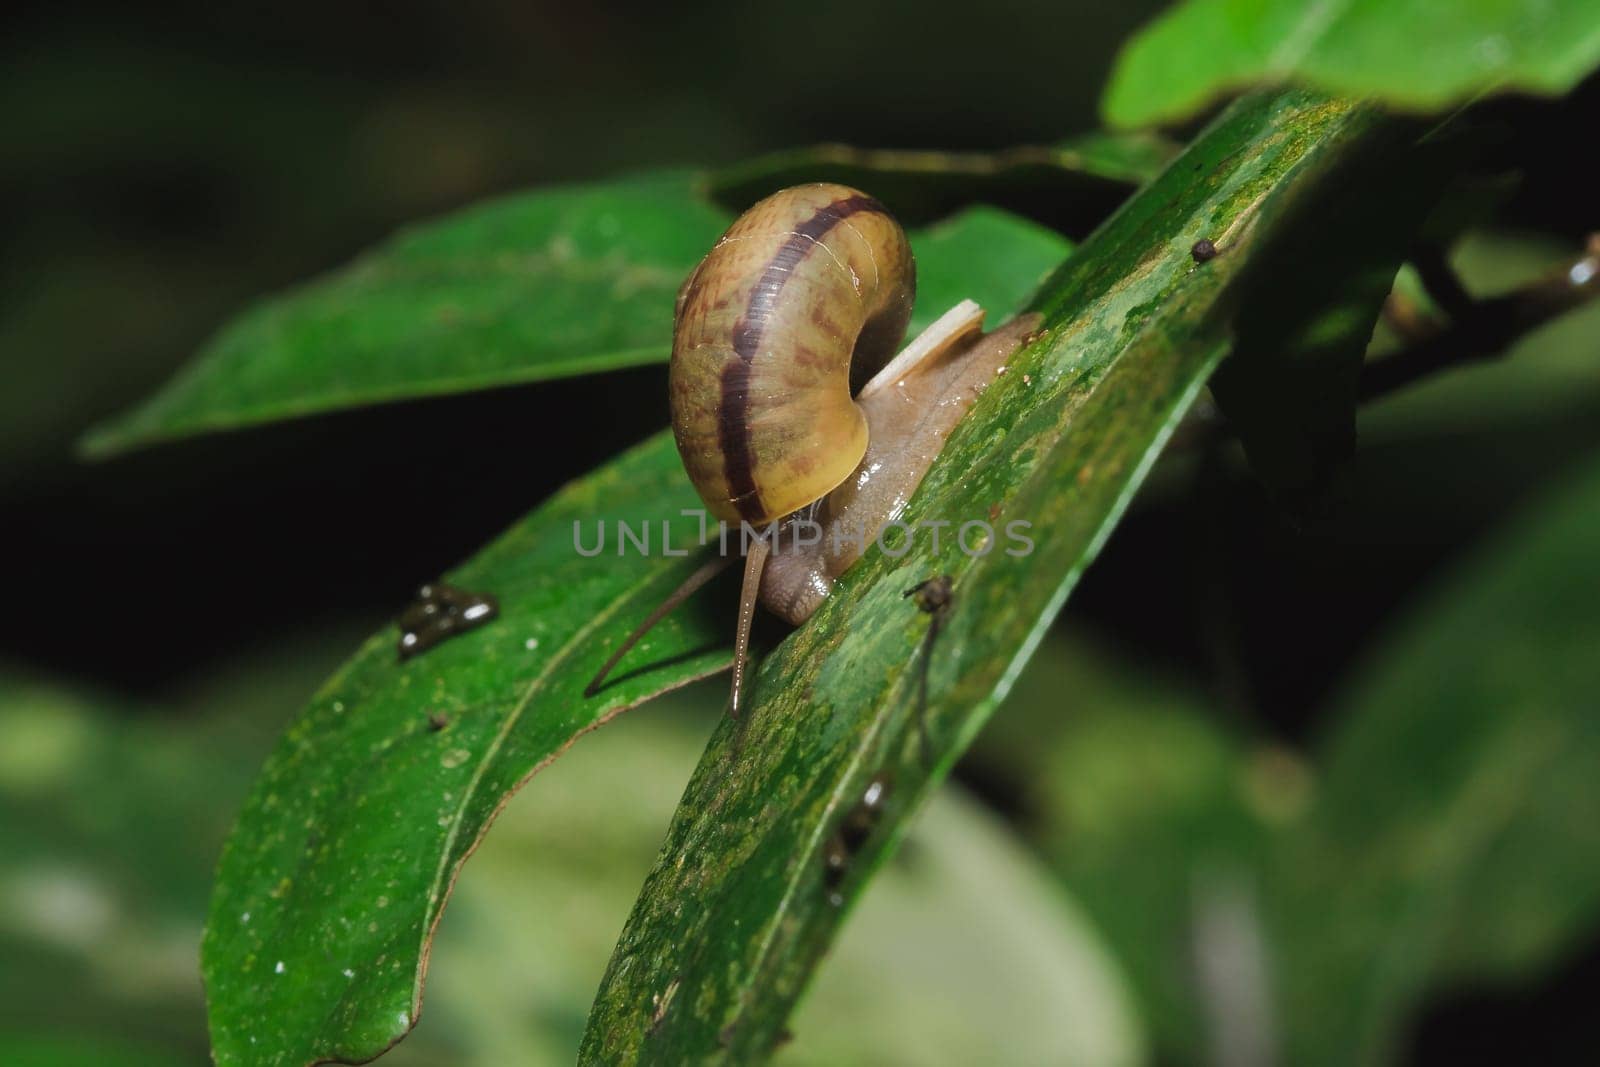 Snail on a leaf in harmony with nature.